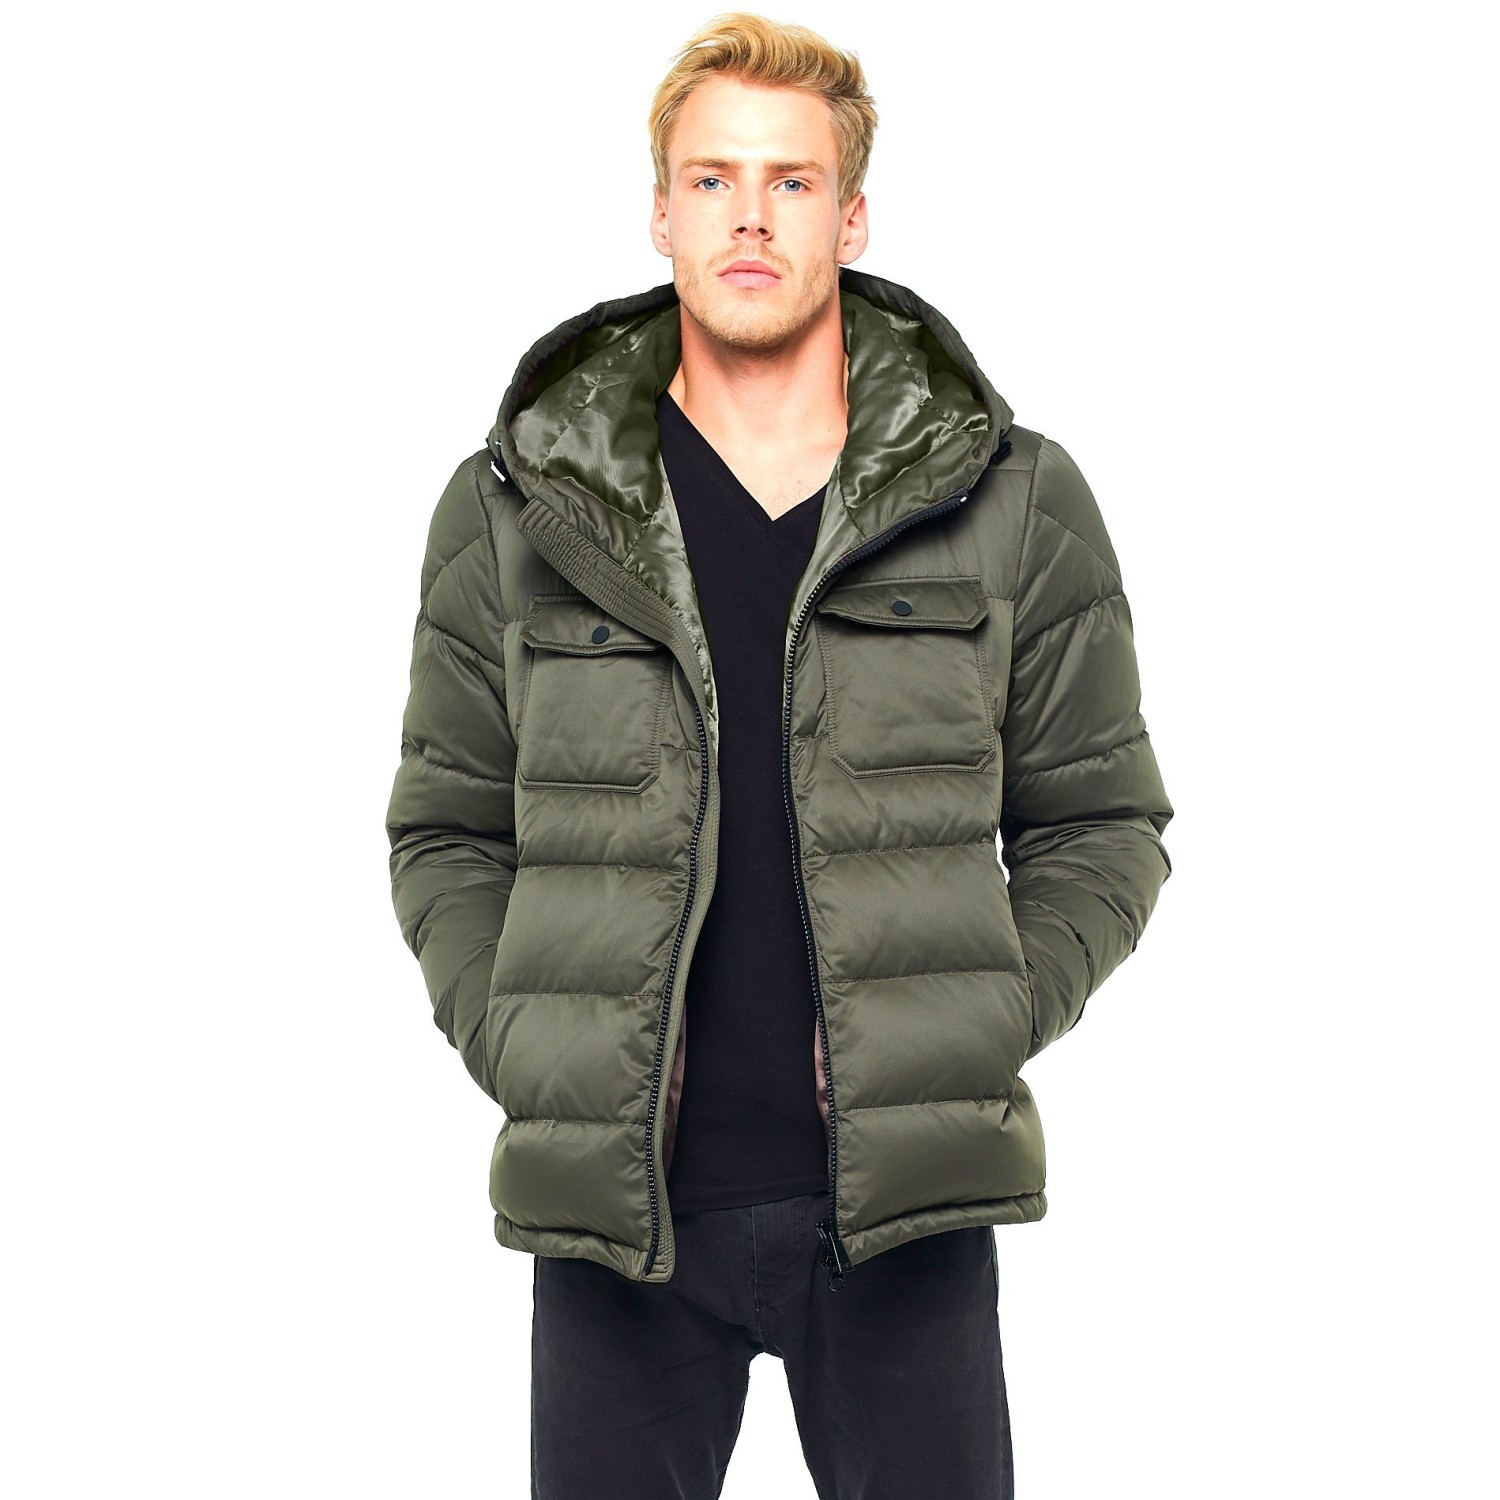 SHOWNO Men Plus Size Fall & Winter Parka Faux Fur Hooded Thicken Warm Quilted Jacket Coat Outerwear 